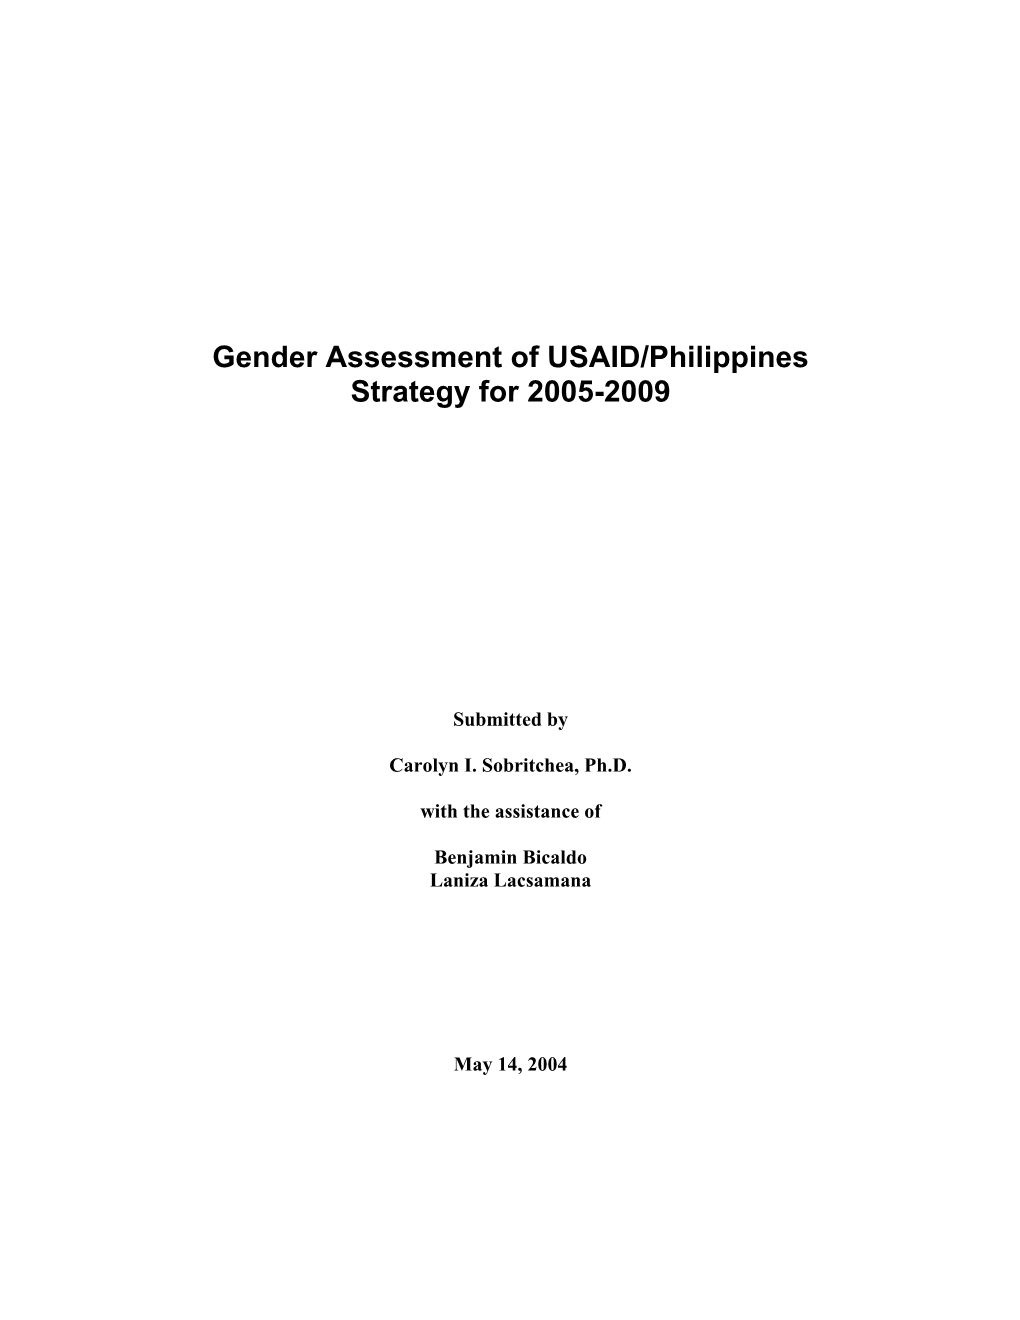 Gender Assessment of USAID/Philippines Strategy for 2005-2009